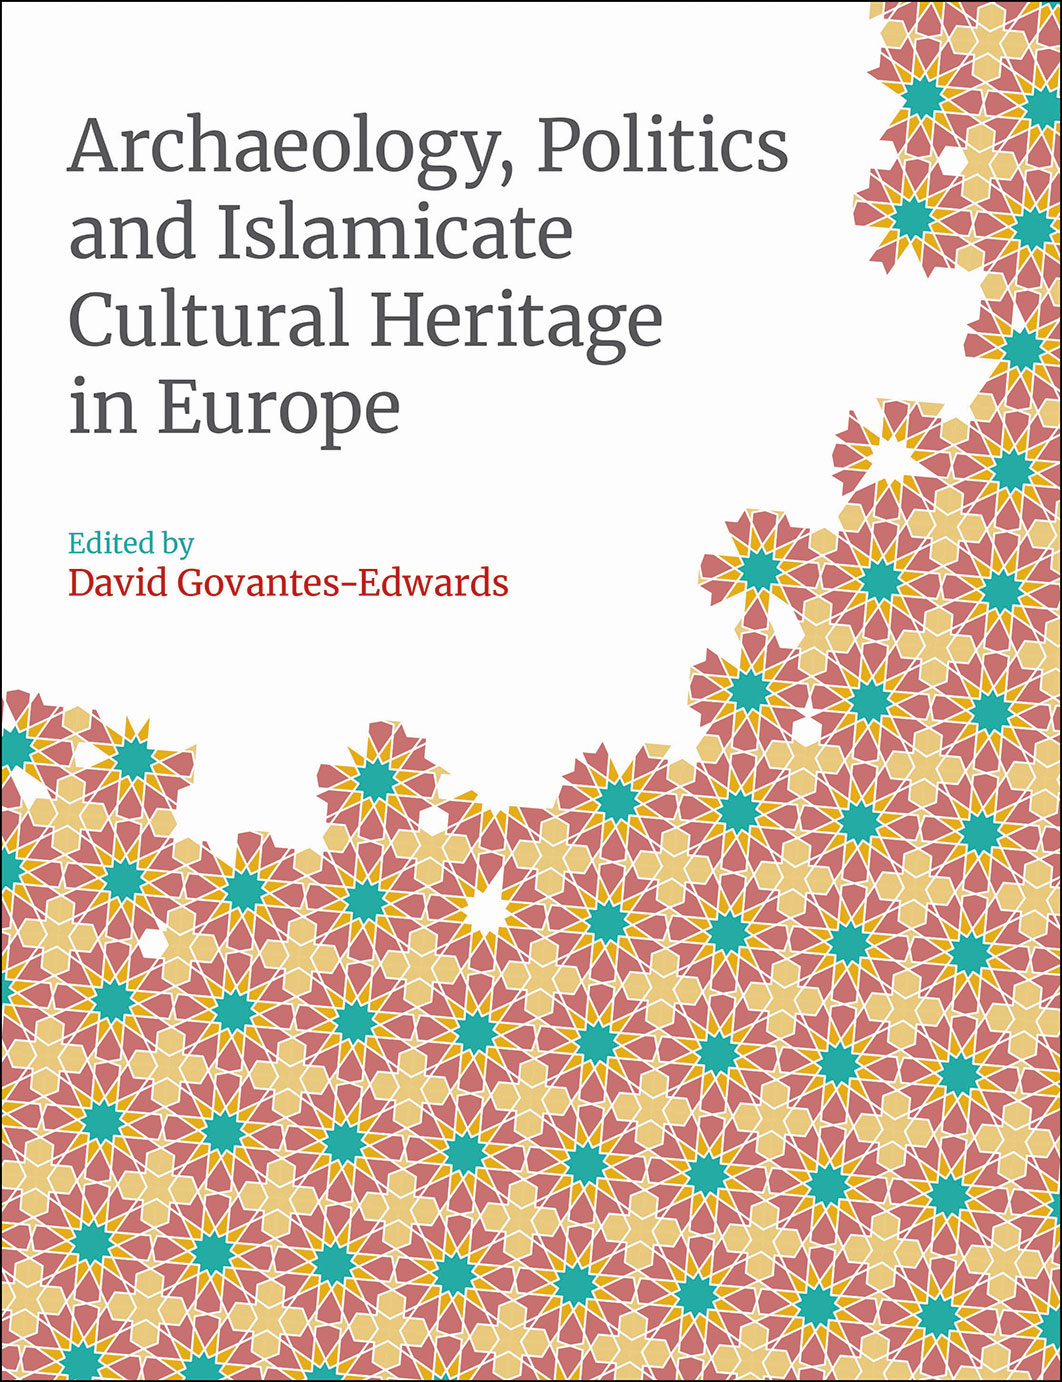 Archaeology, Politics and Islamicate Cultural Heritage in Europe